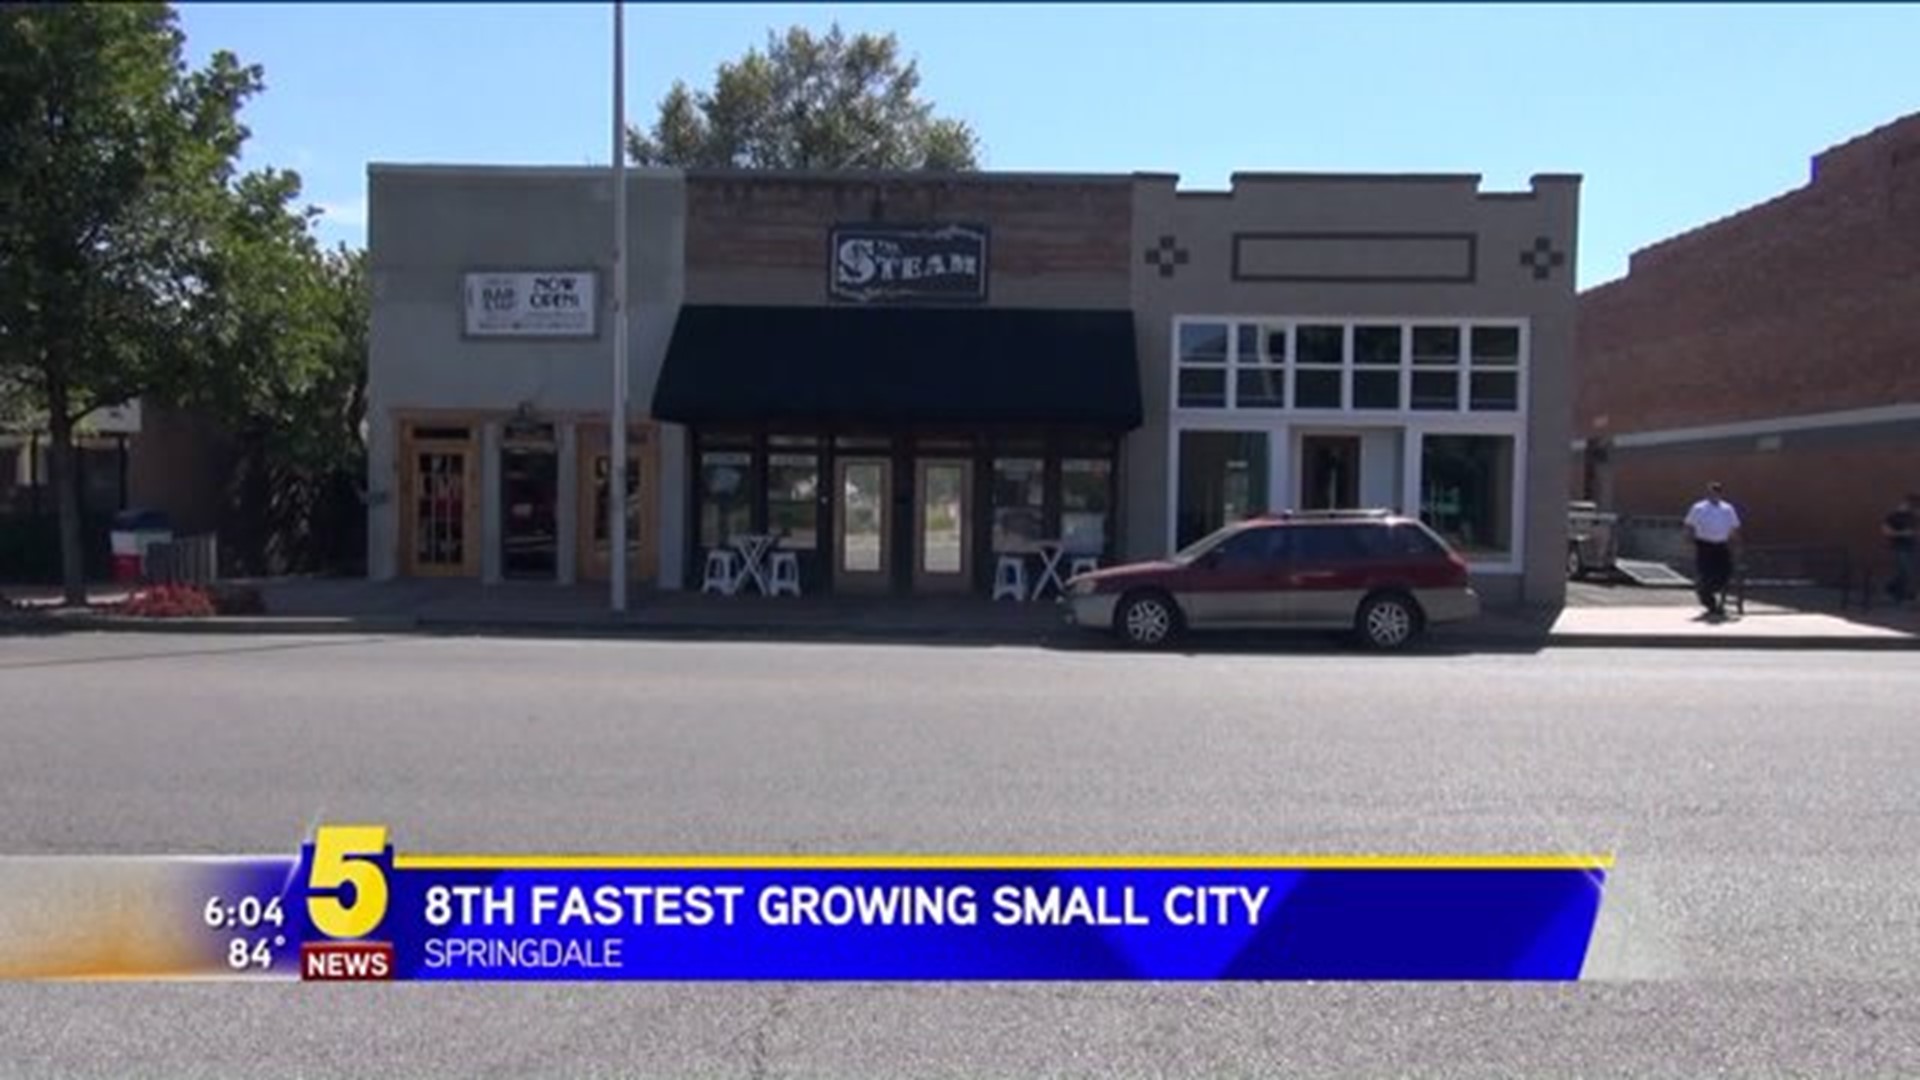 Springdale 8th Fastest Growing Small City